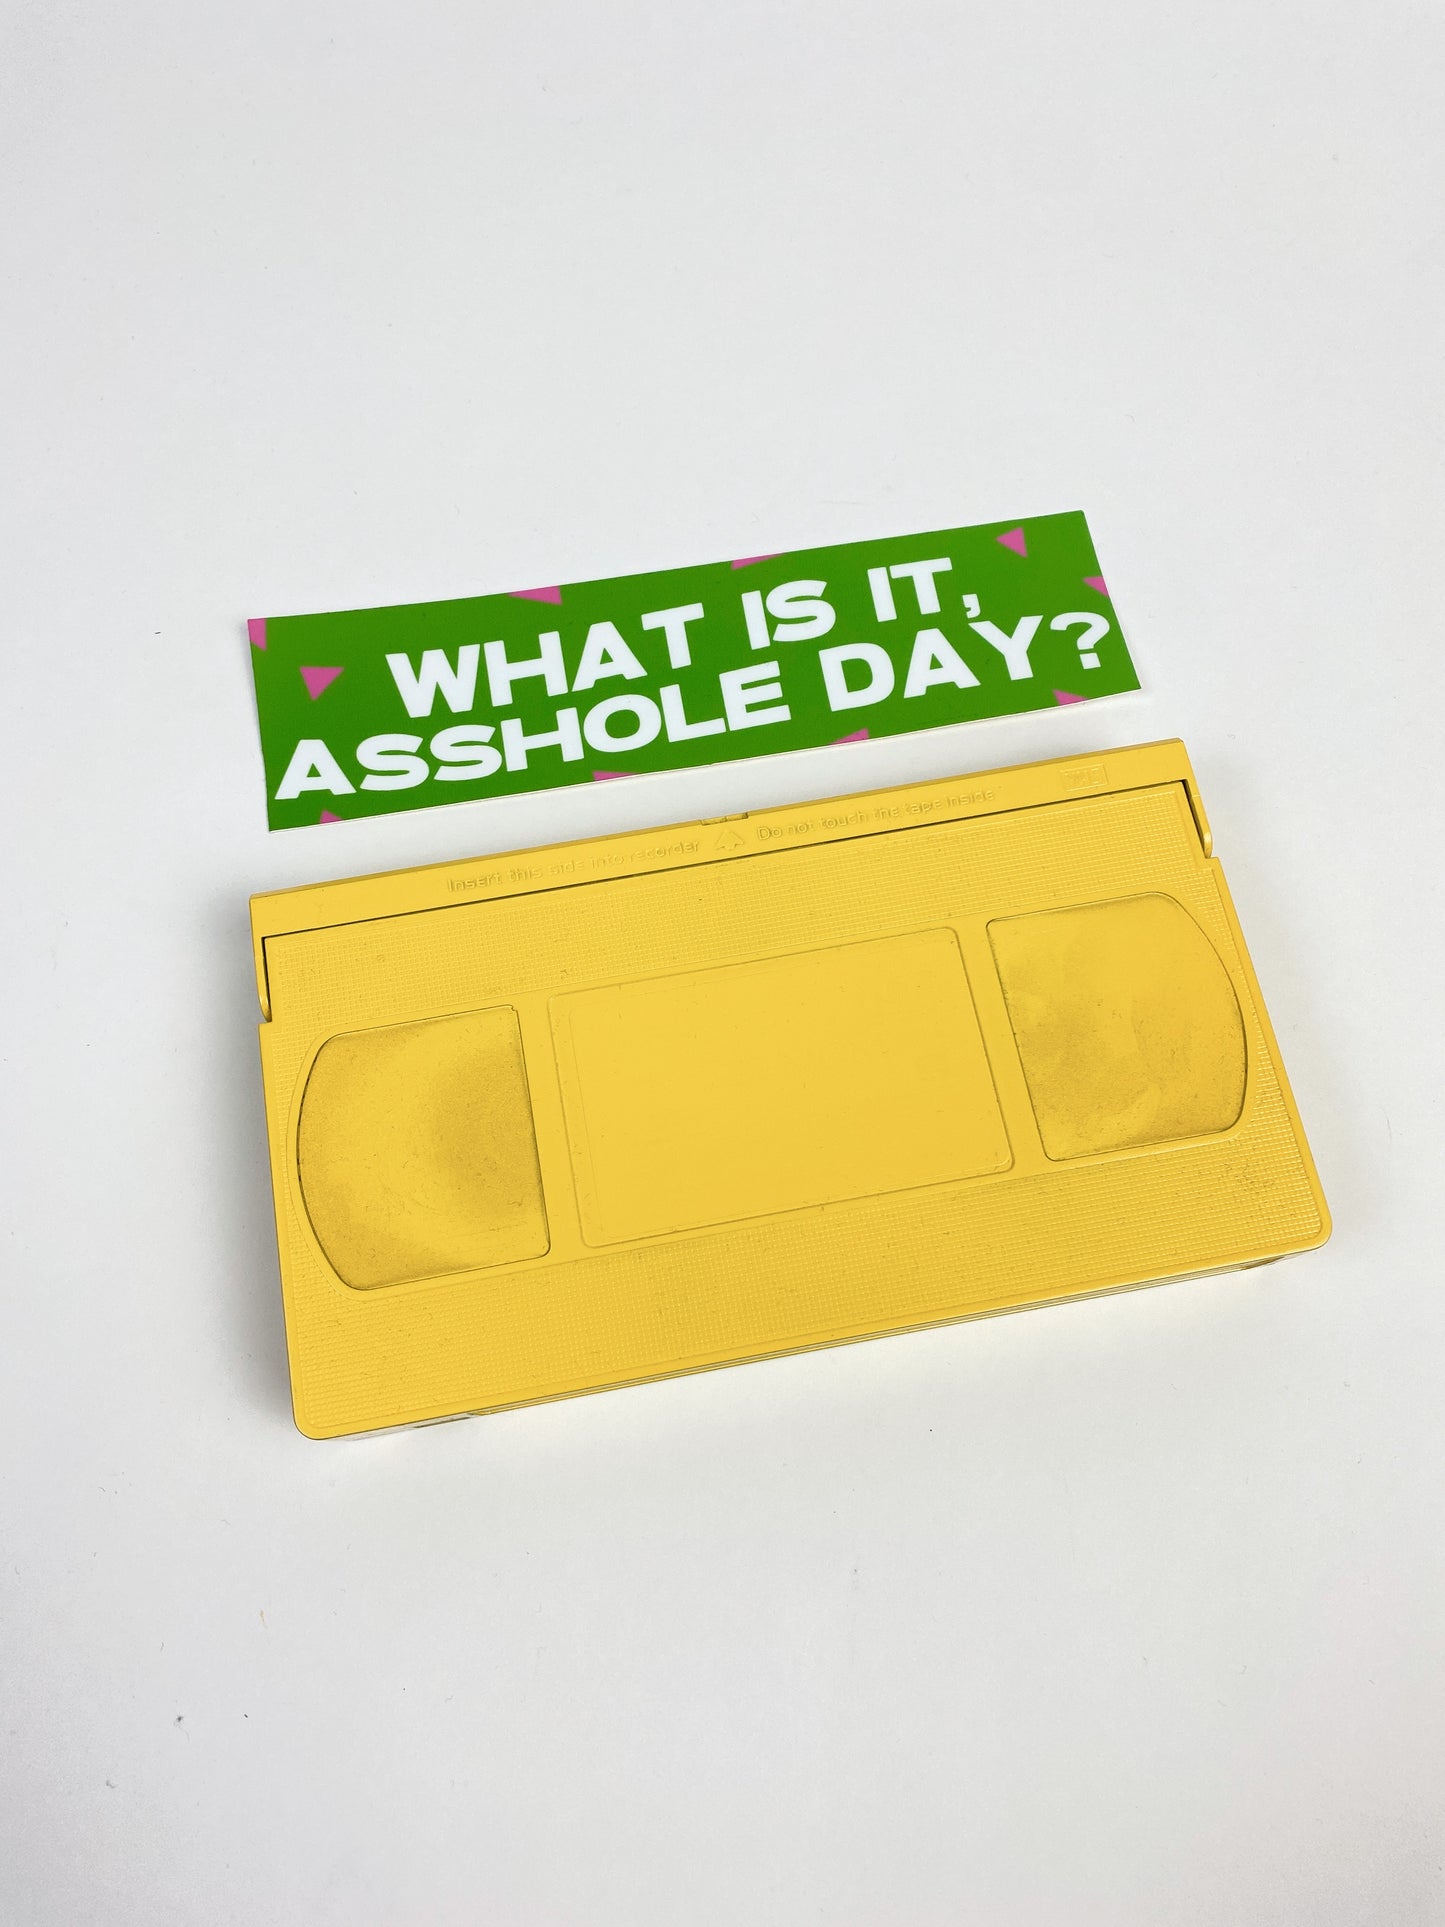 10 Things I Hate About You What Is It, A**hole Day? Bumper Sticker - Totally Good Time